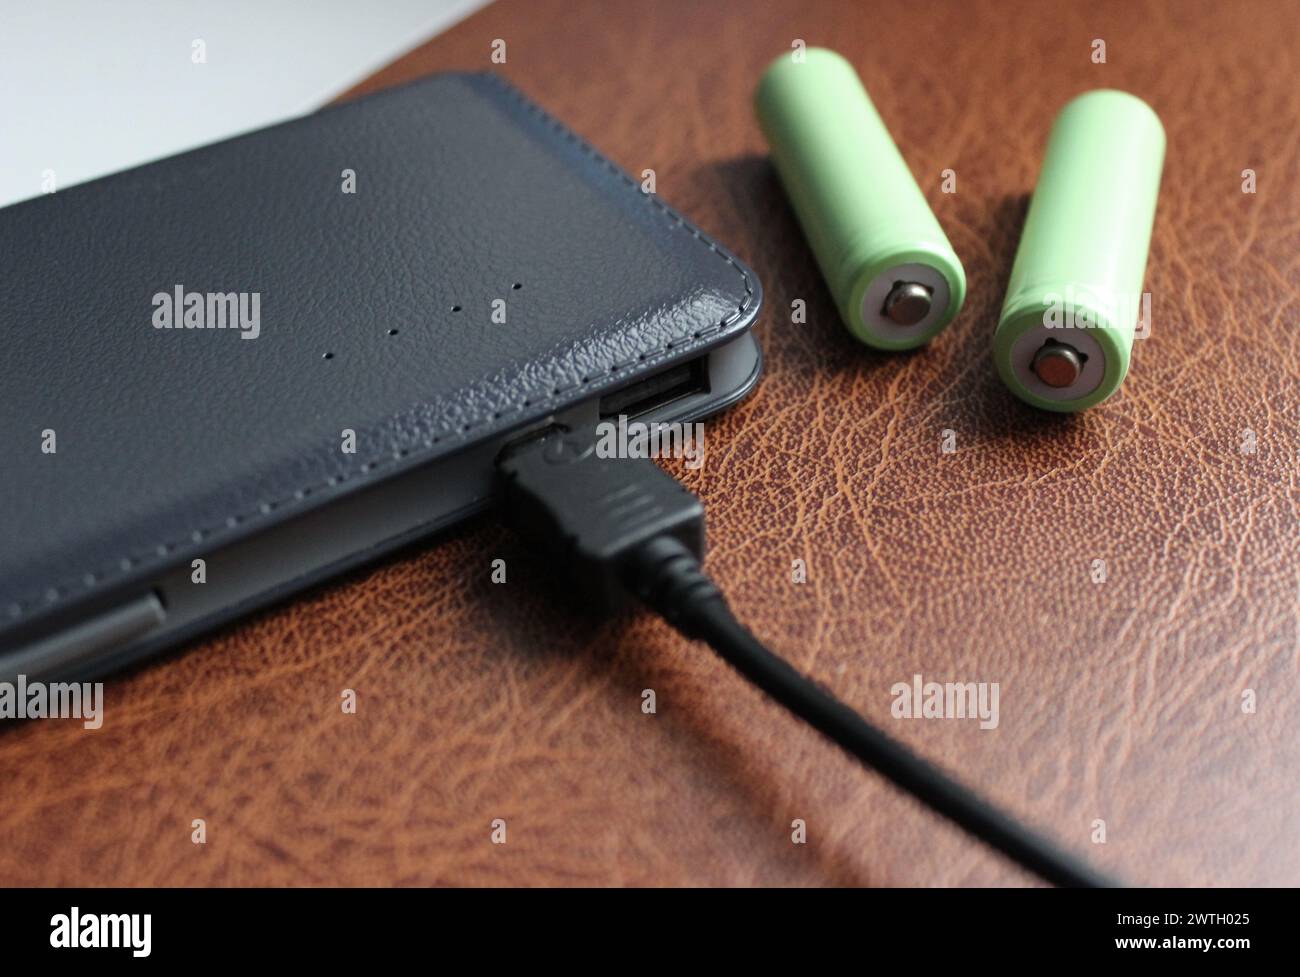 Portable Power Energy Sources. Rechargeable AA Batteries Near Expensive Power Bank On A Leather Trimmed Folder Stock Photo